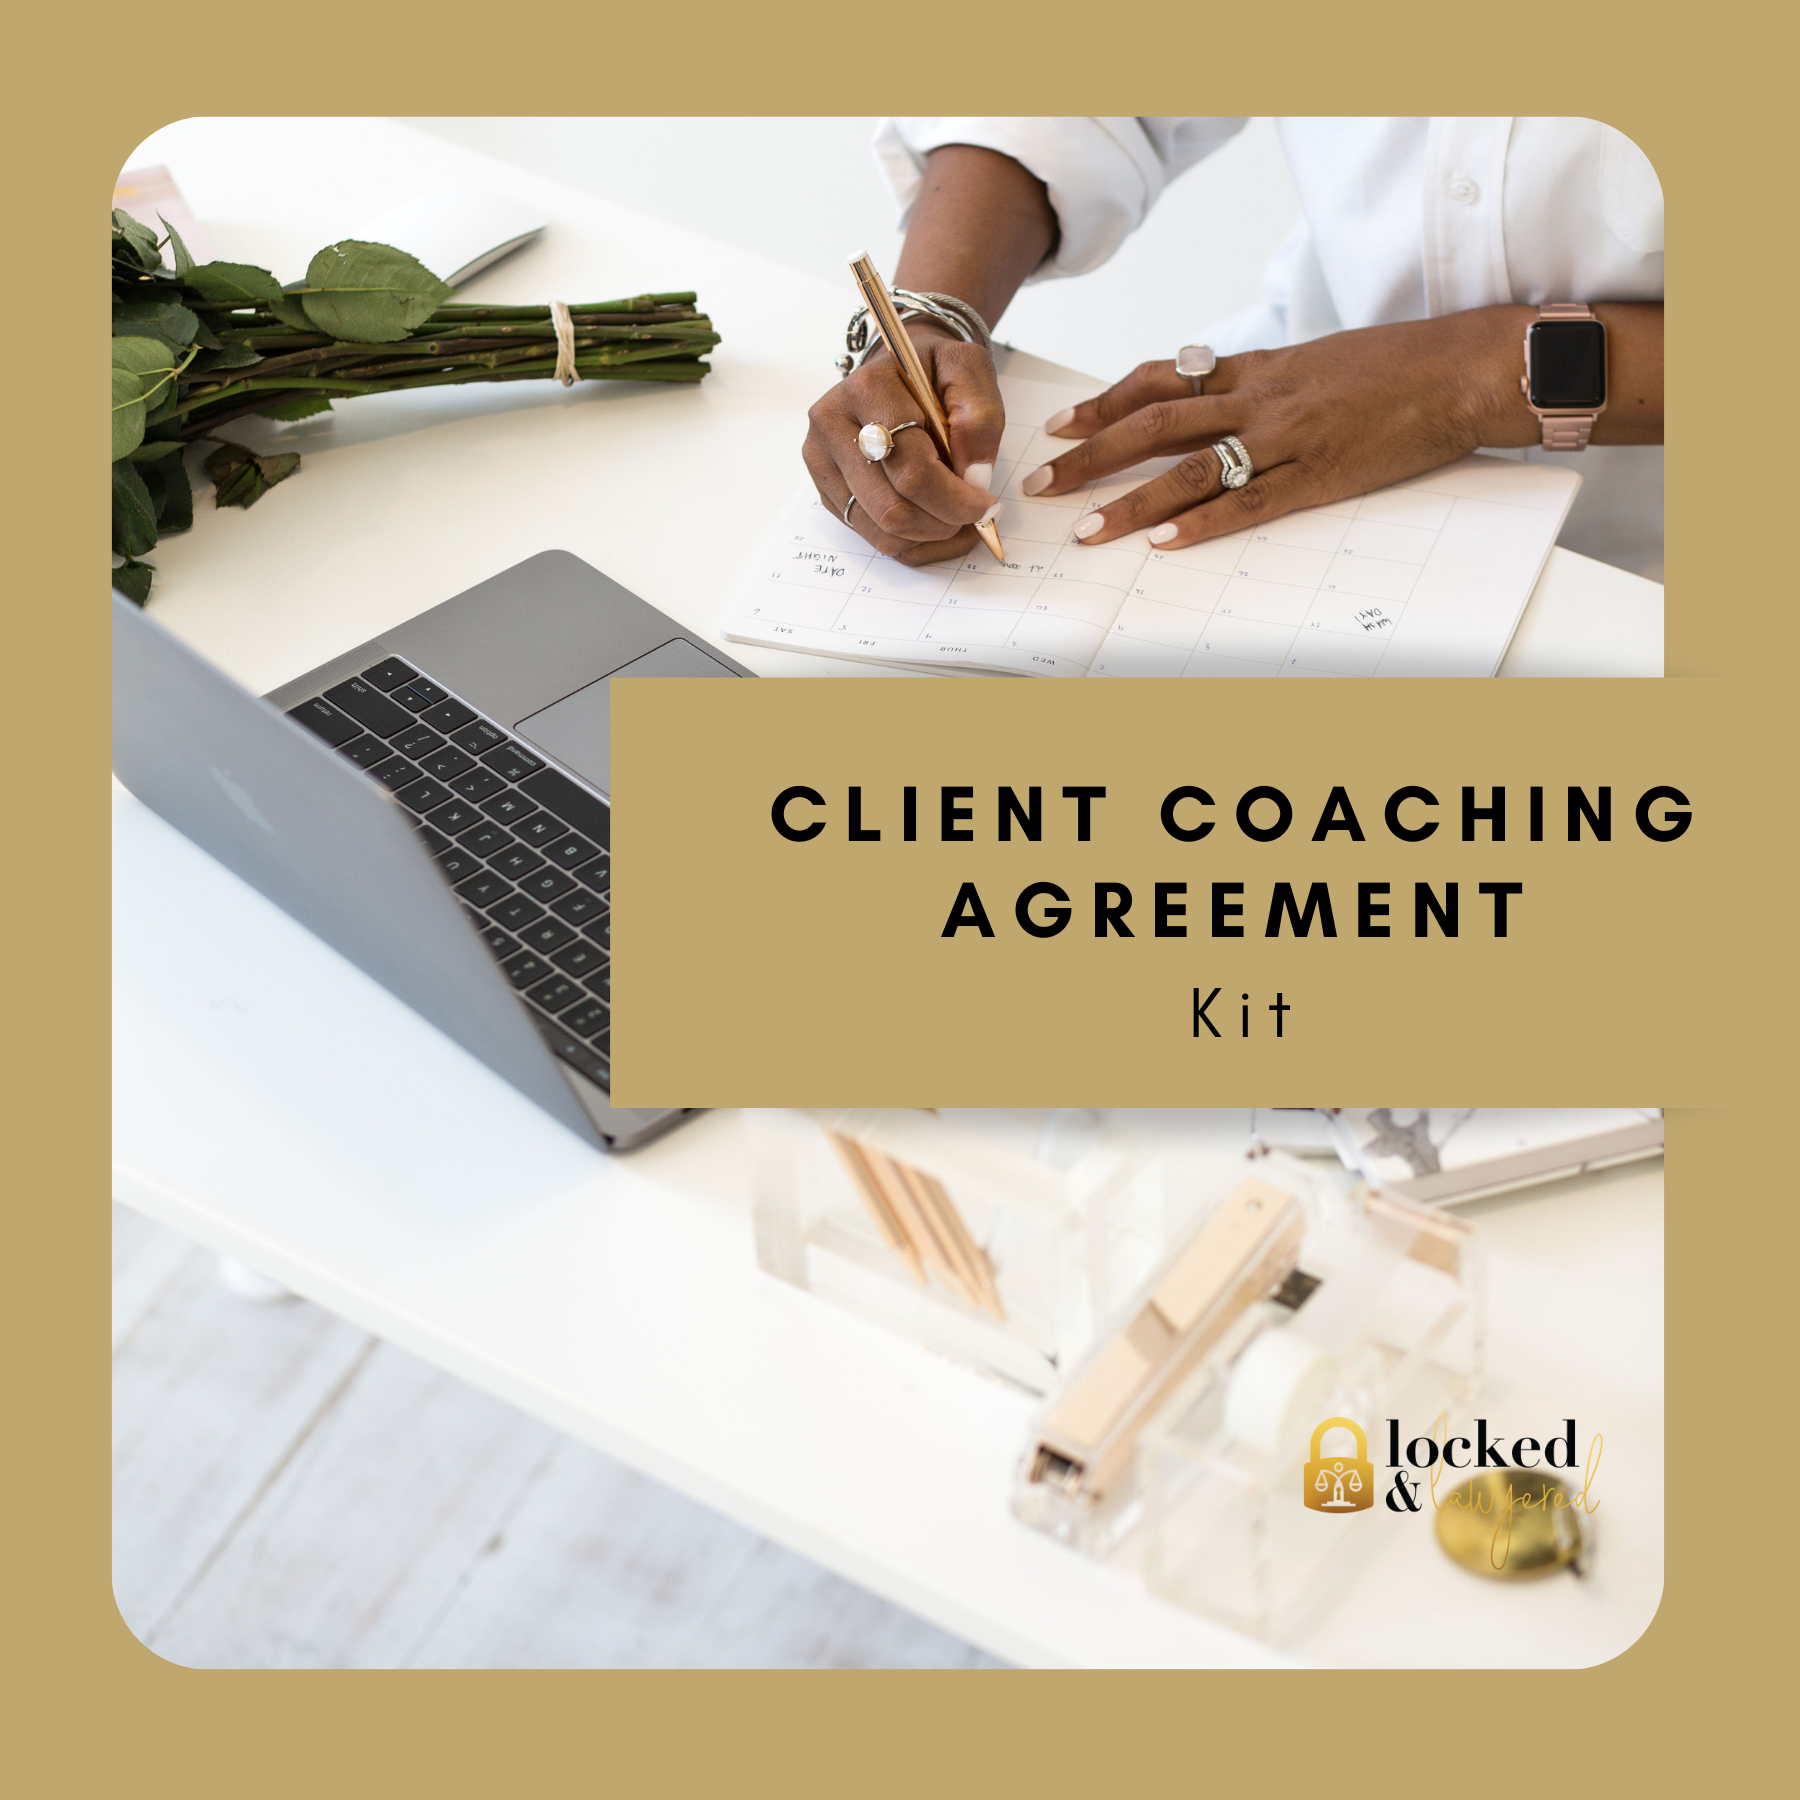 Client Coaching Agreement Kit